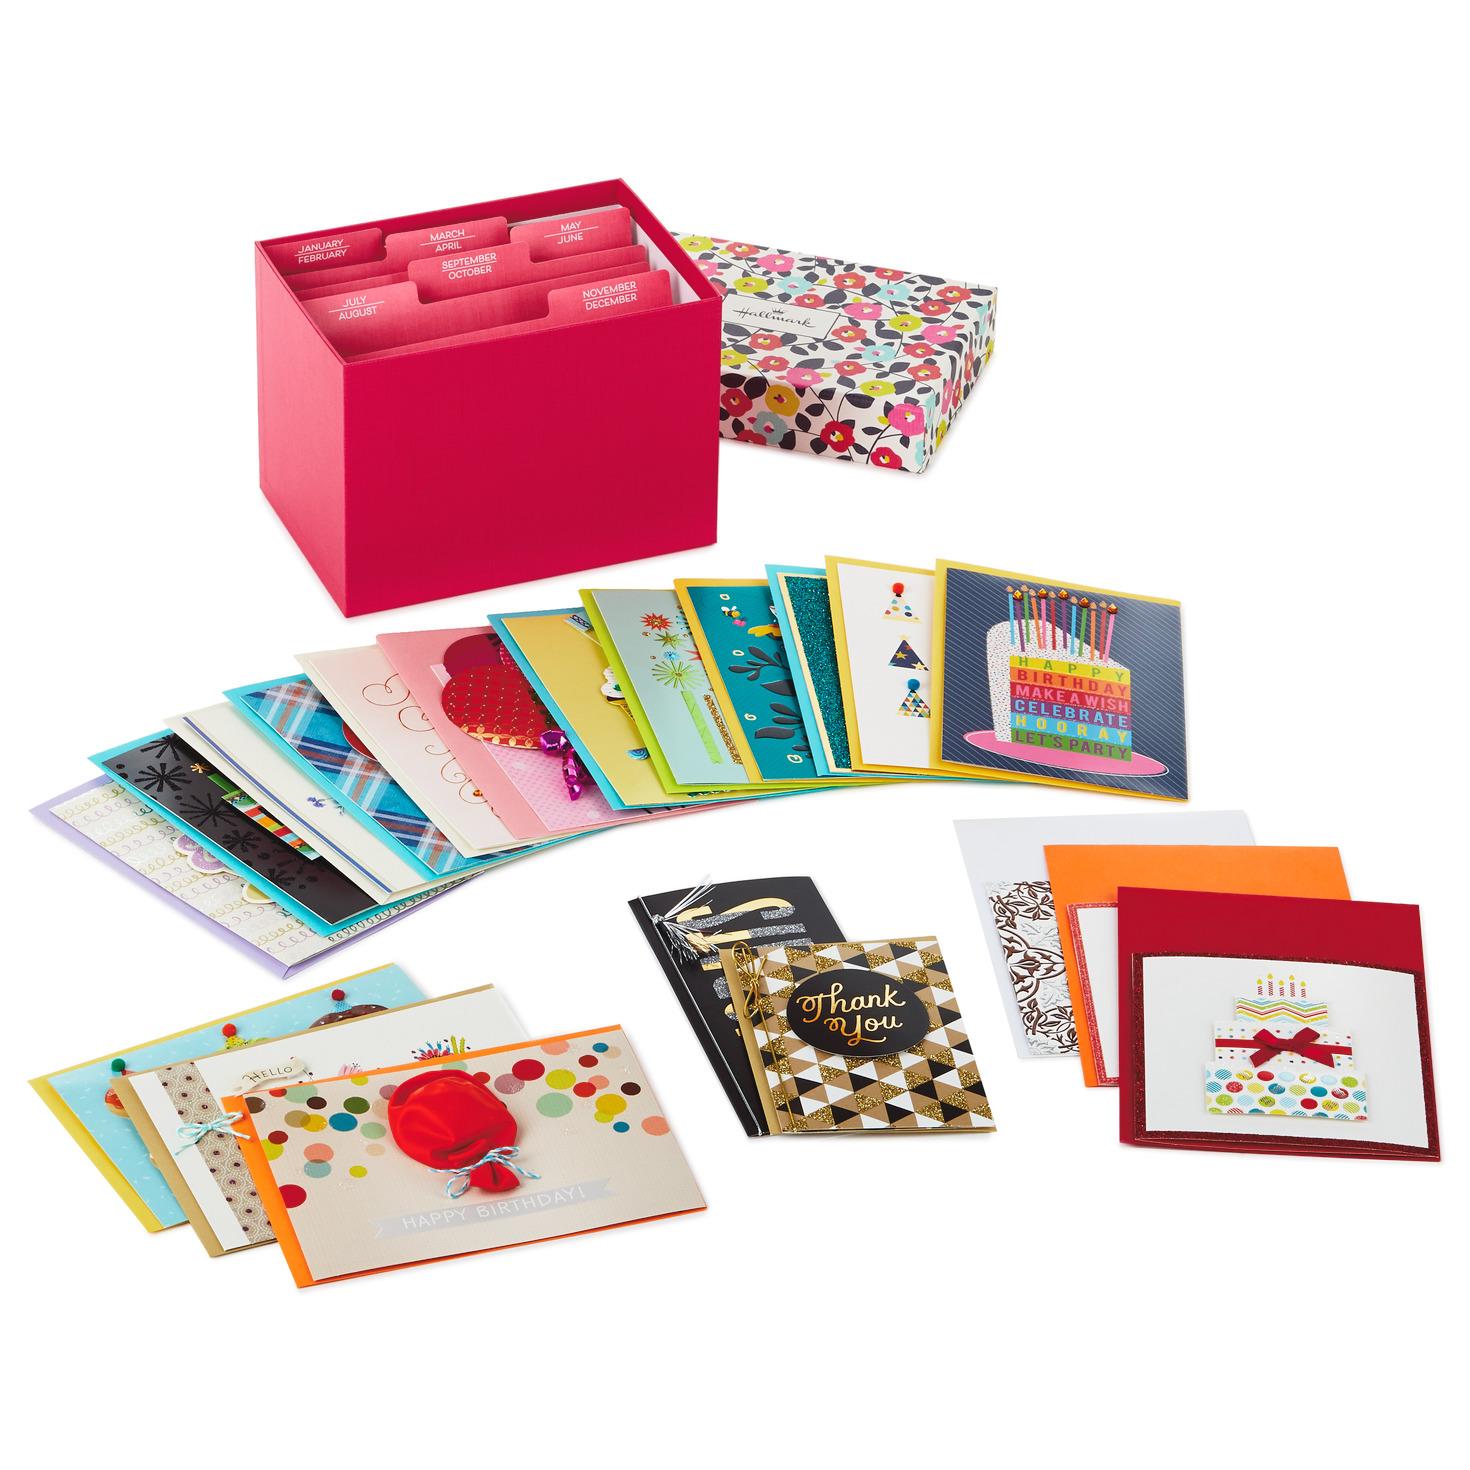 All Occasion Card Assortment in Decorative Box, Set of 20 - Boxed